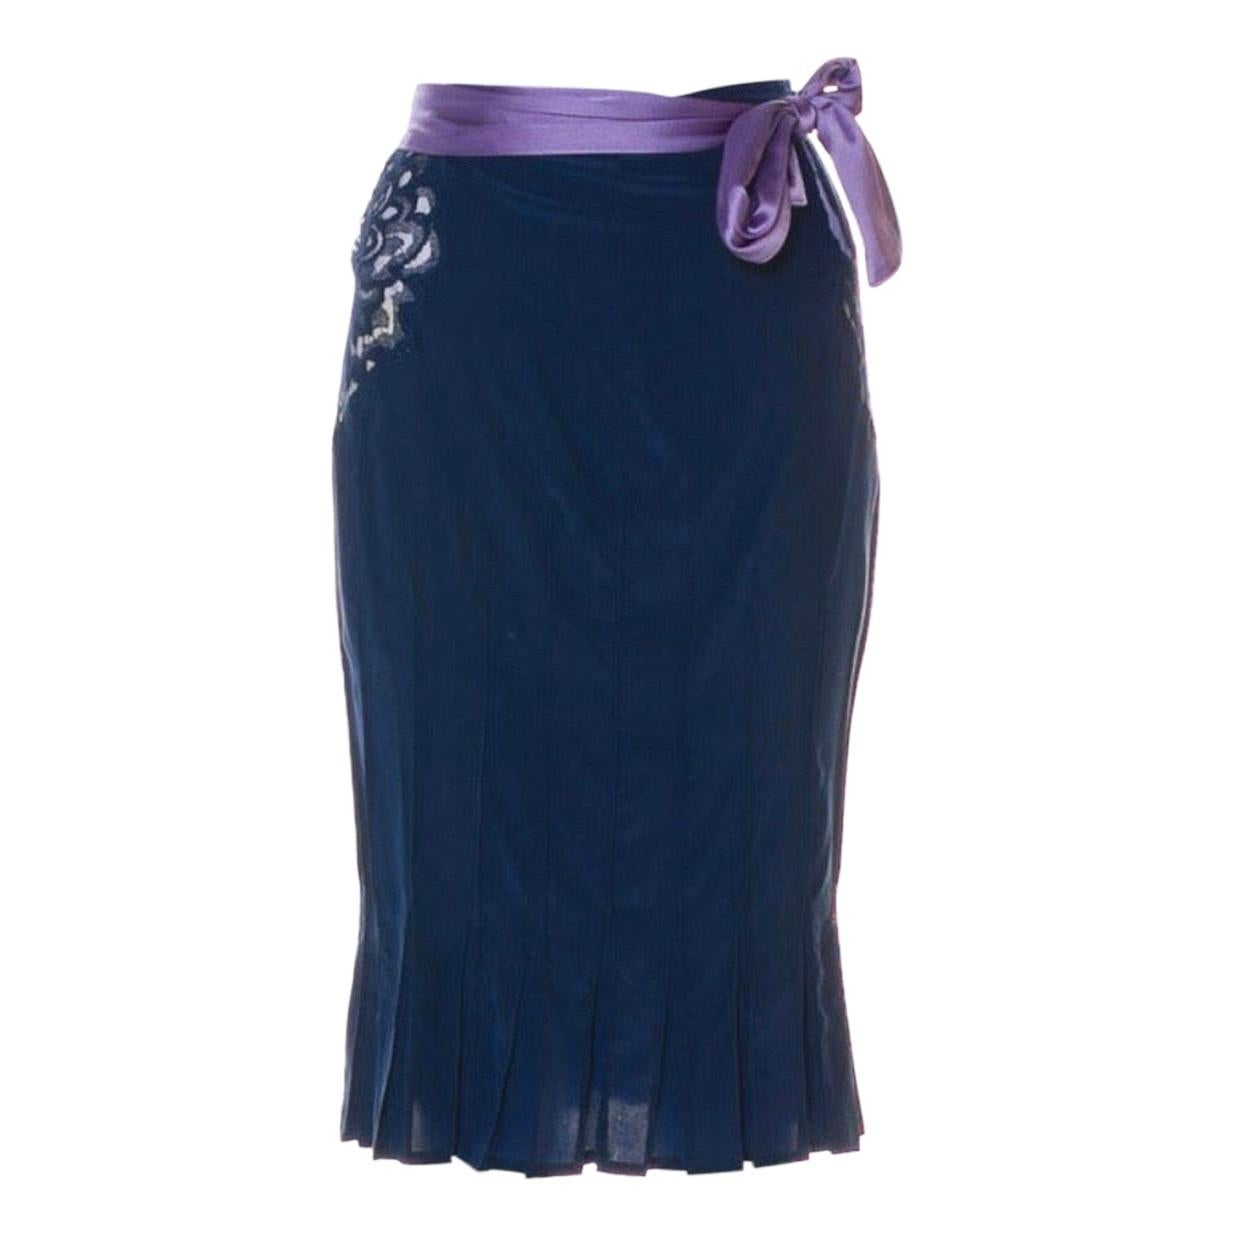 2004 Yves Saint Laurent by Tom Ford blue silk skirt with lace accents on sides